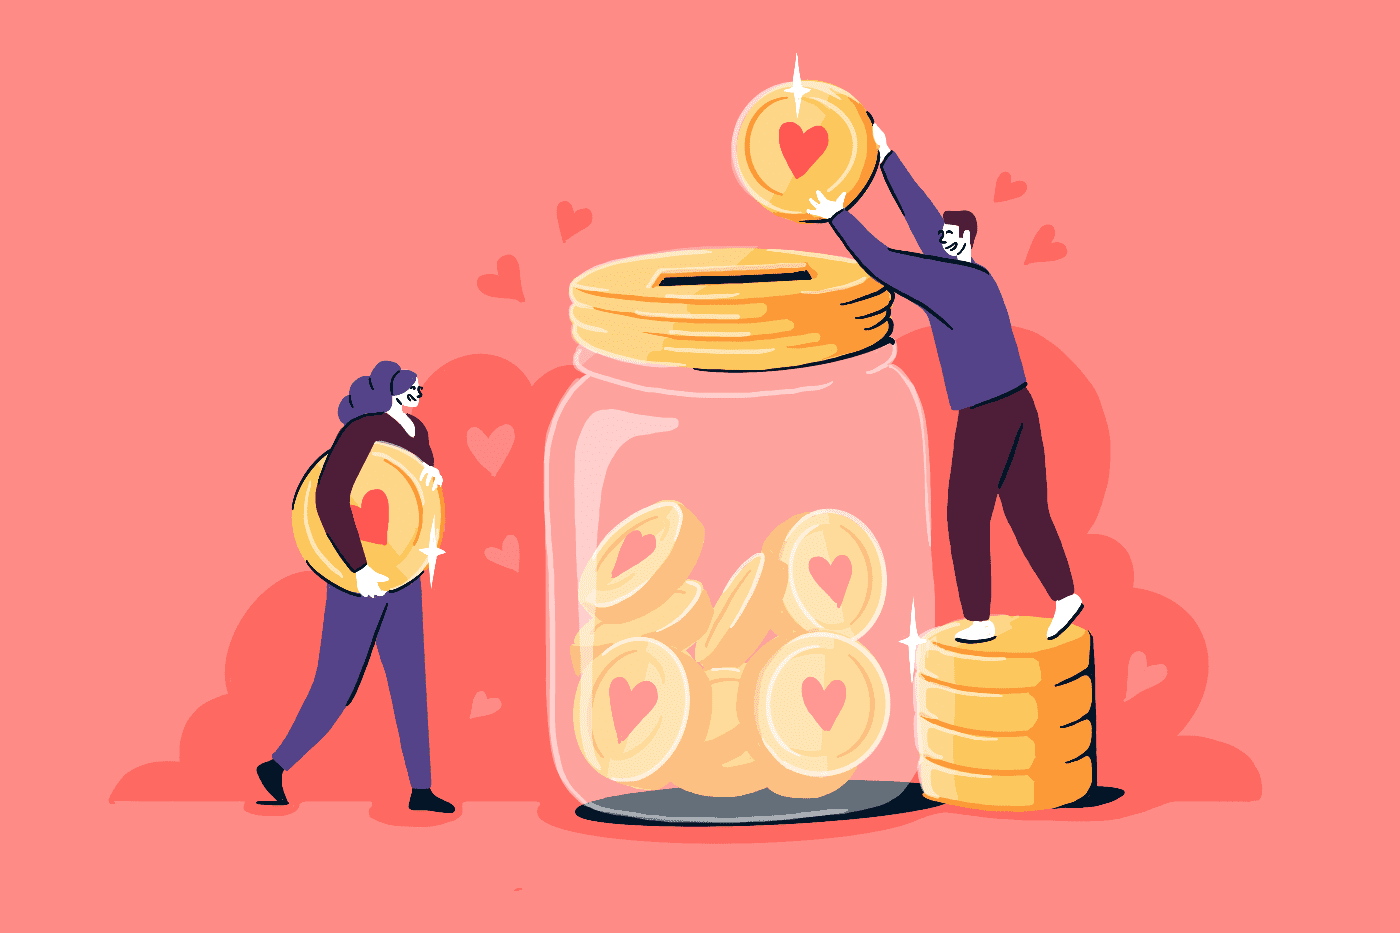 Illustration of two people donating money